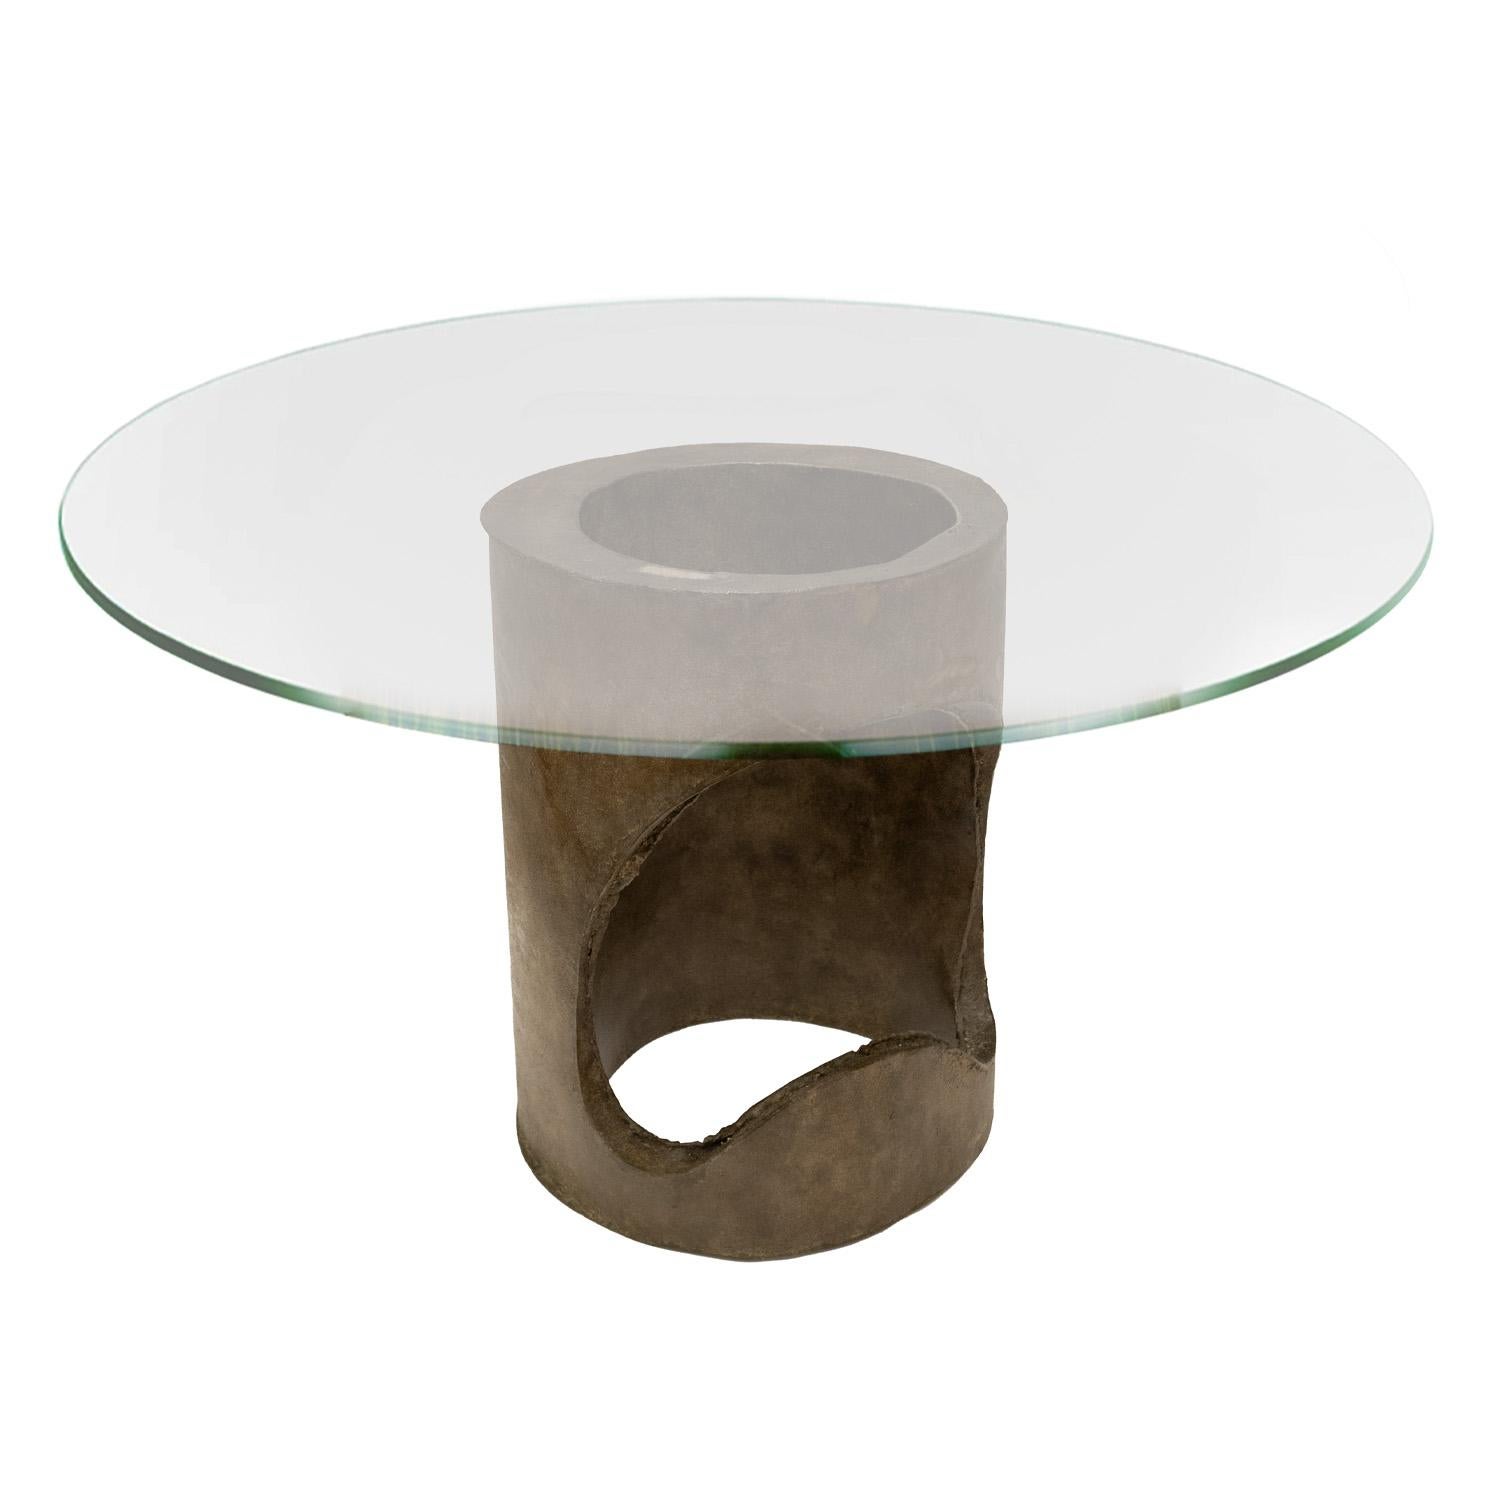 Sculpture dining/game table with hand-welded pewter base finished in bronze tones with negative space and thick glass top by Philip & Kelvin LaVerne, American 1970's (signed on top “PK LaVerne”).  This is a unique sculpture which can take a larger